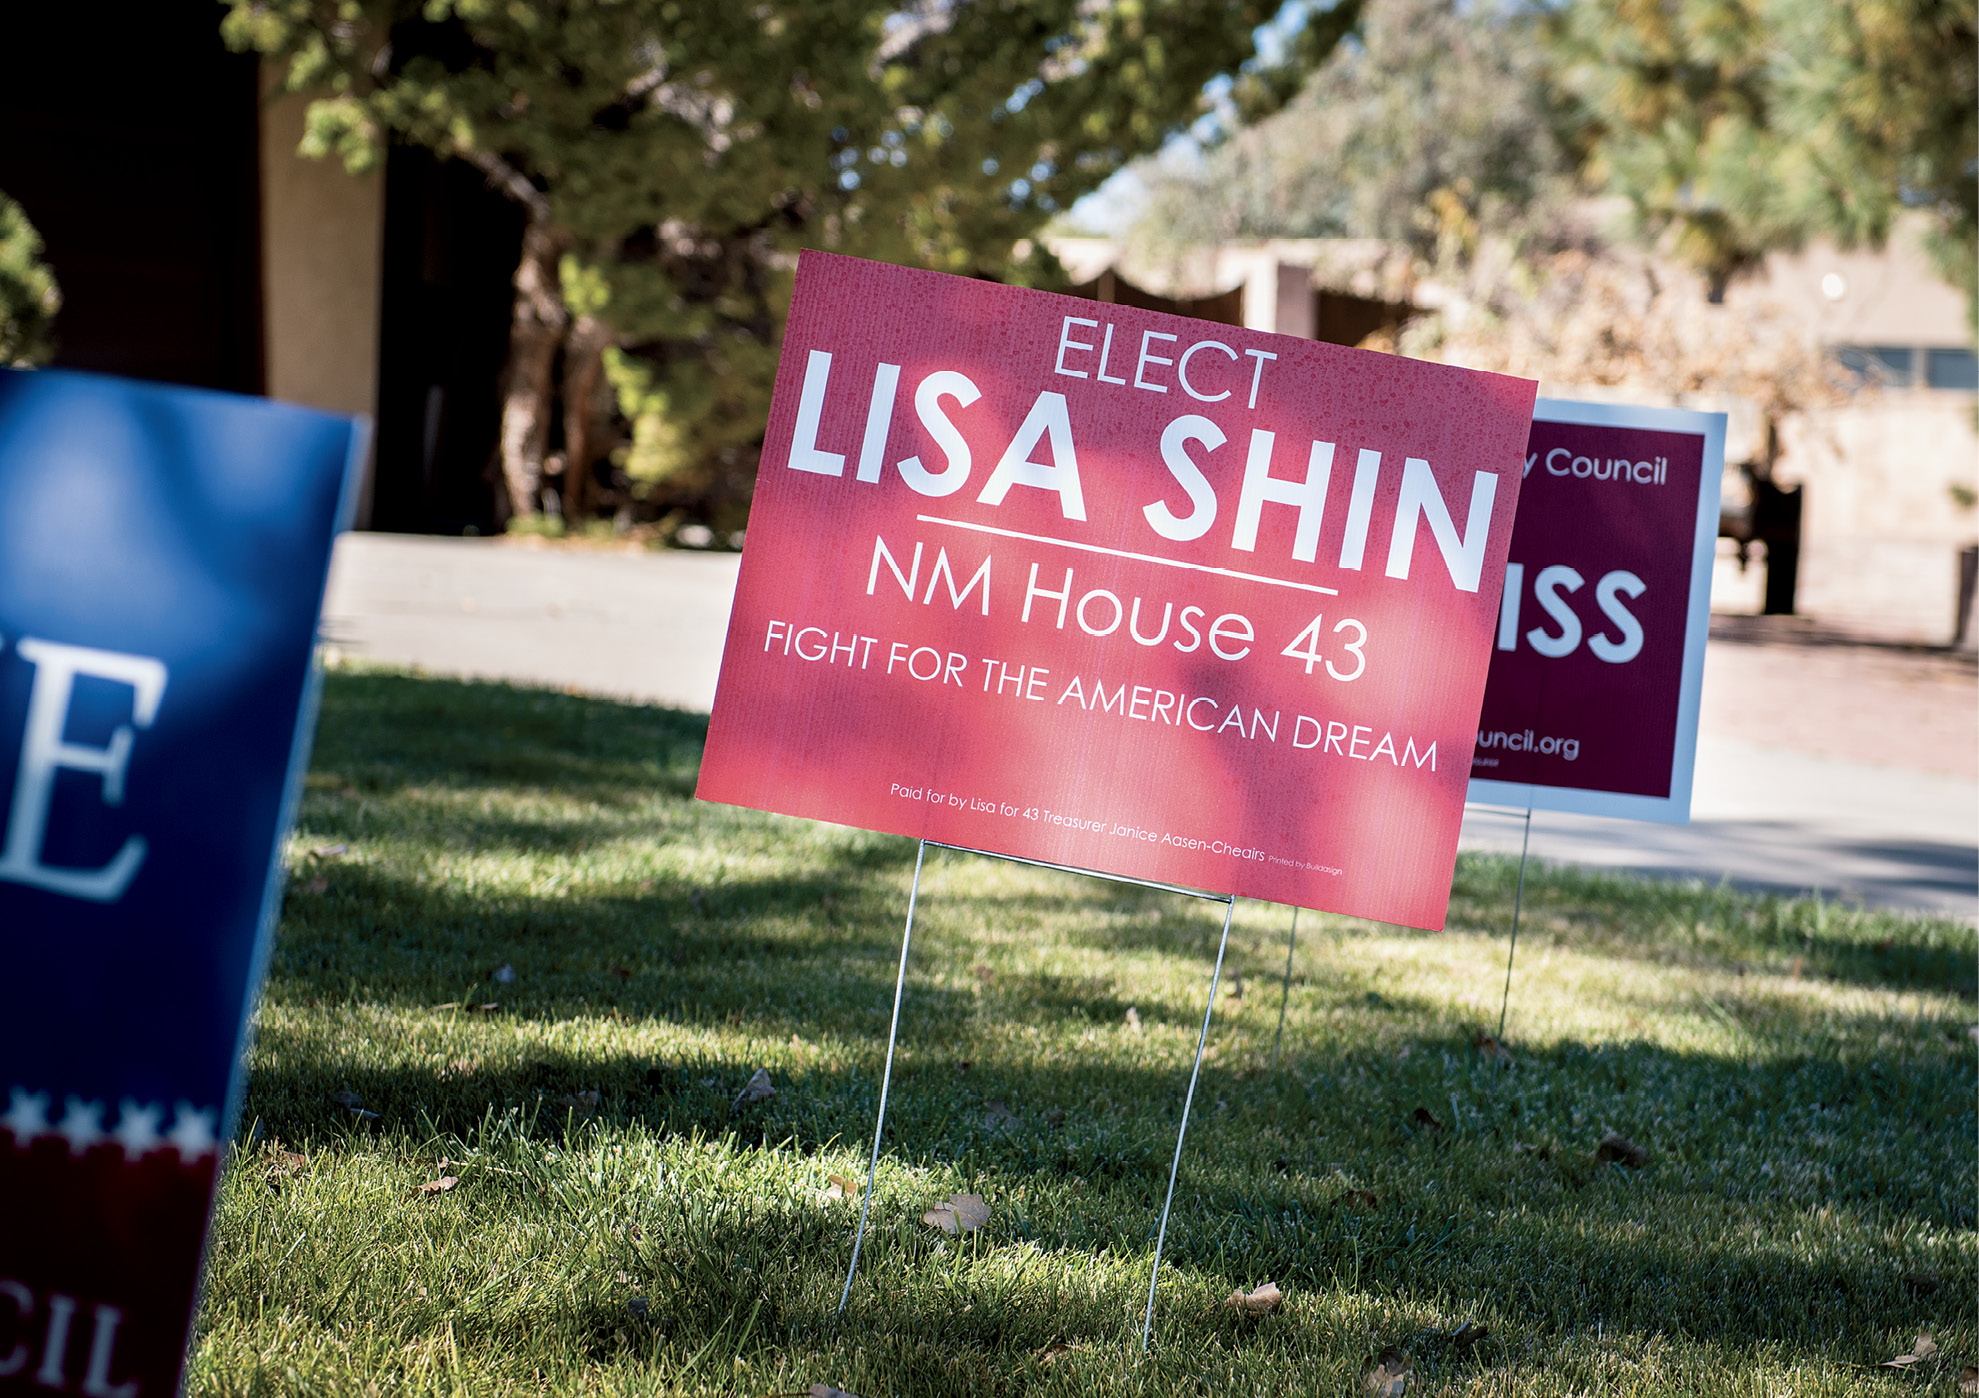 A red lawn sign reads, "Elect Lisa Shin NM House 43 Fight for the American Dream"